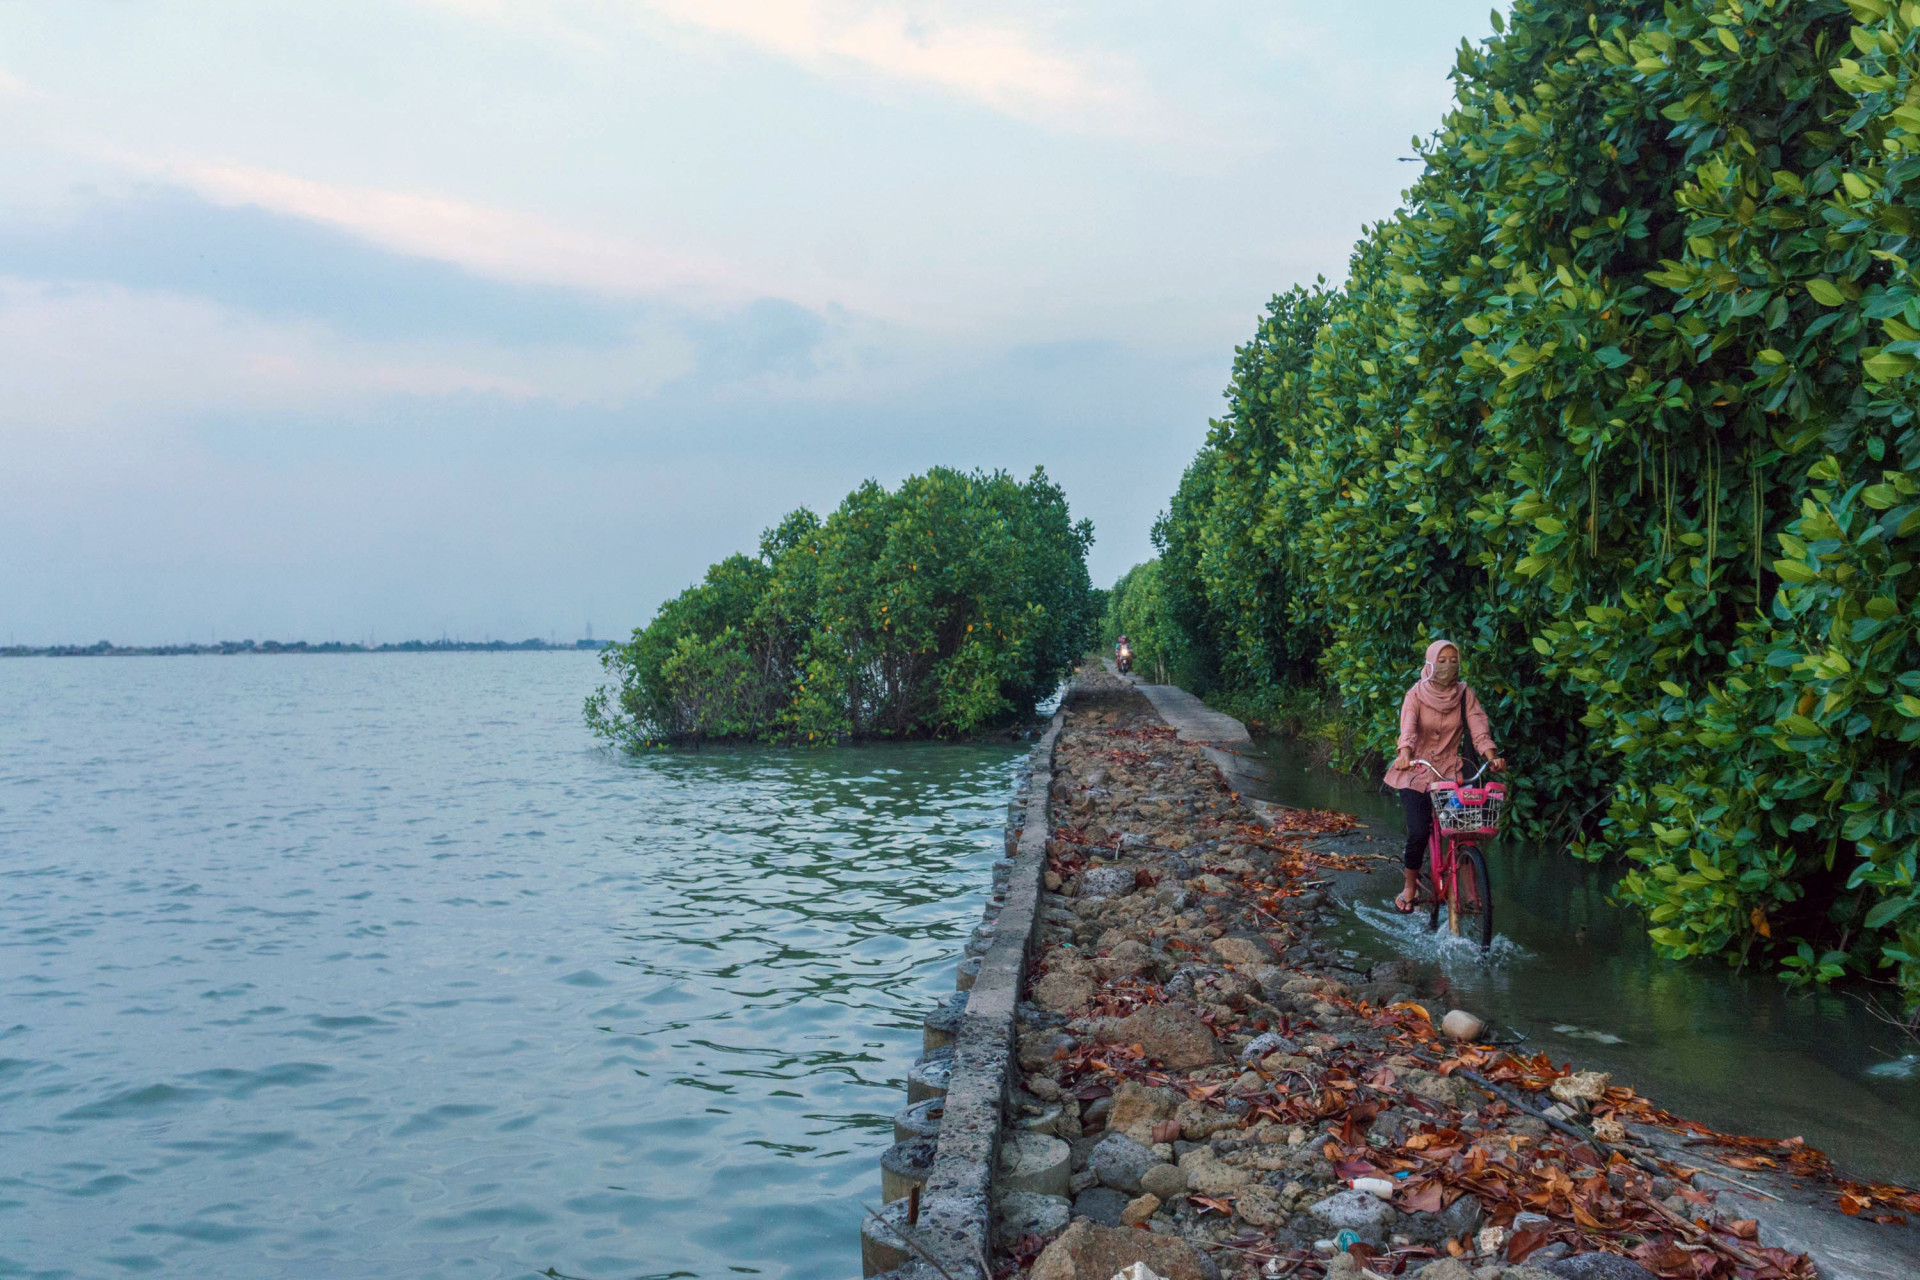 A woman on her way home from work, cycling along a path that is flooded every day by rising sea levels, in Demak, Indonesia.